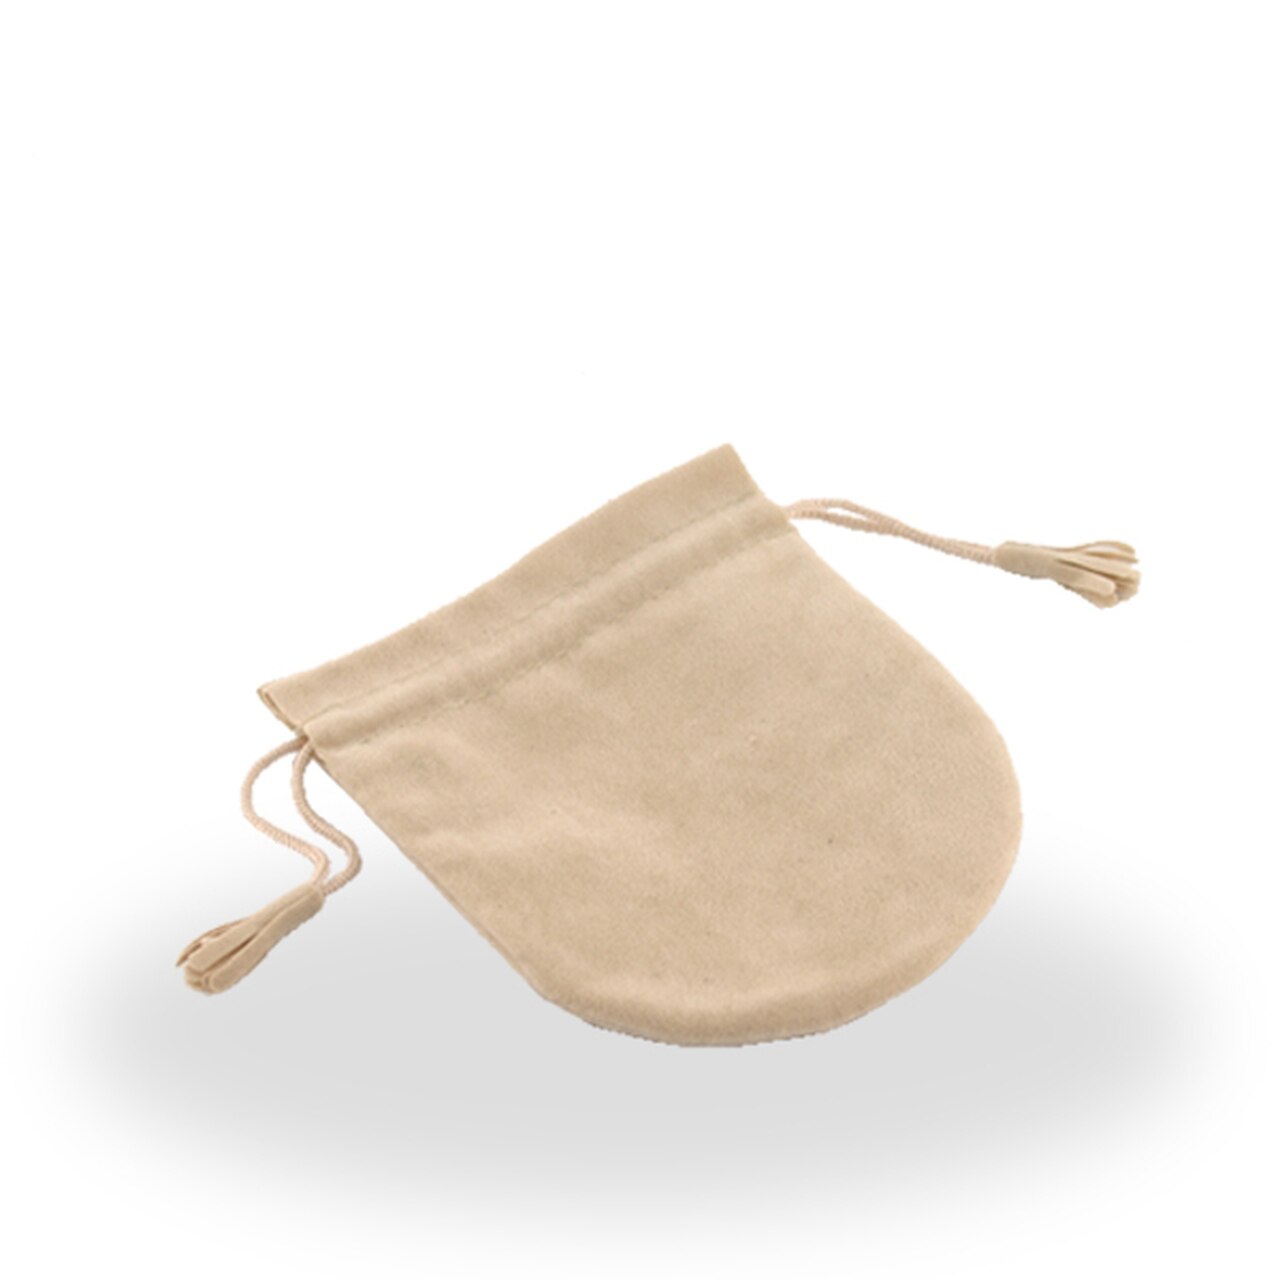 Small Pouch | Suede or Suede Like Fabric Pouch | 7 by 5 to 8 by 6 inches | Studio Burke Ltd